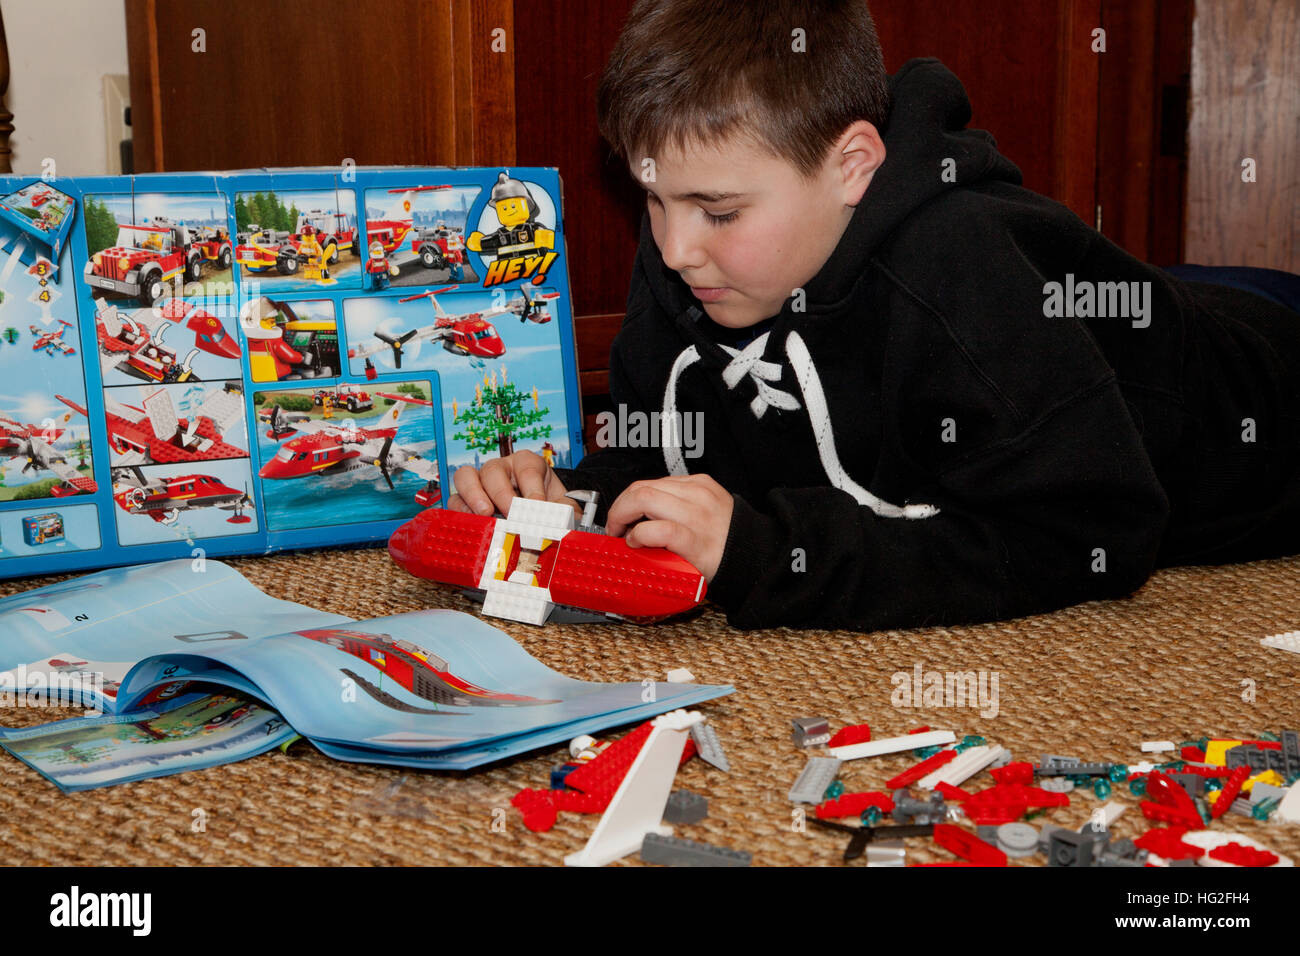 Boy age 10 building a Lego airplane with instruction book open for study and guidance. St Paul Minnesota MN USA Stock Photo